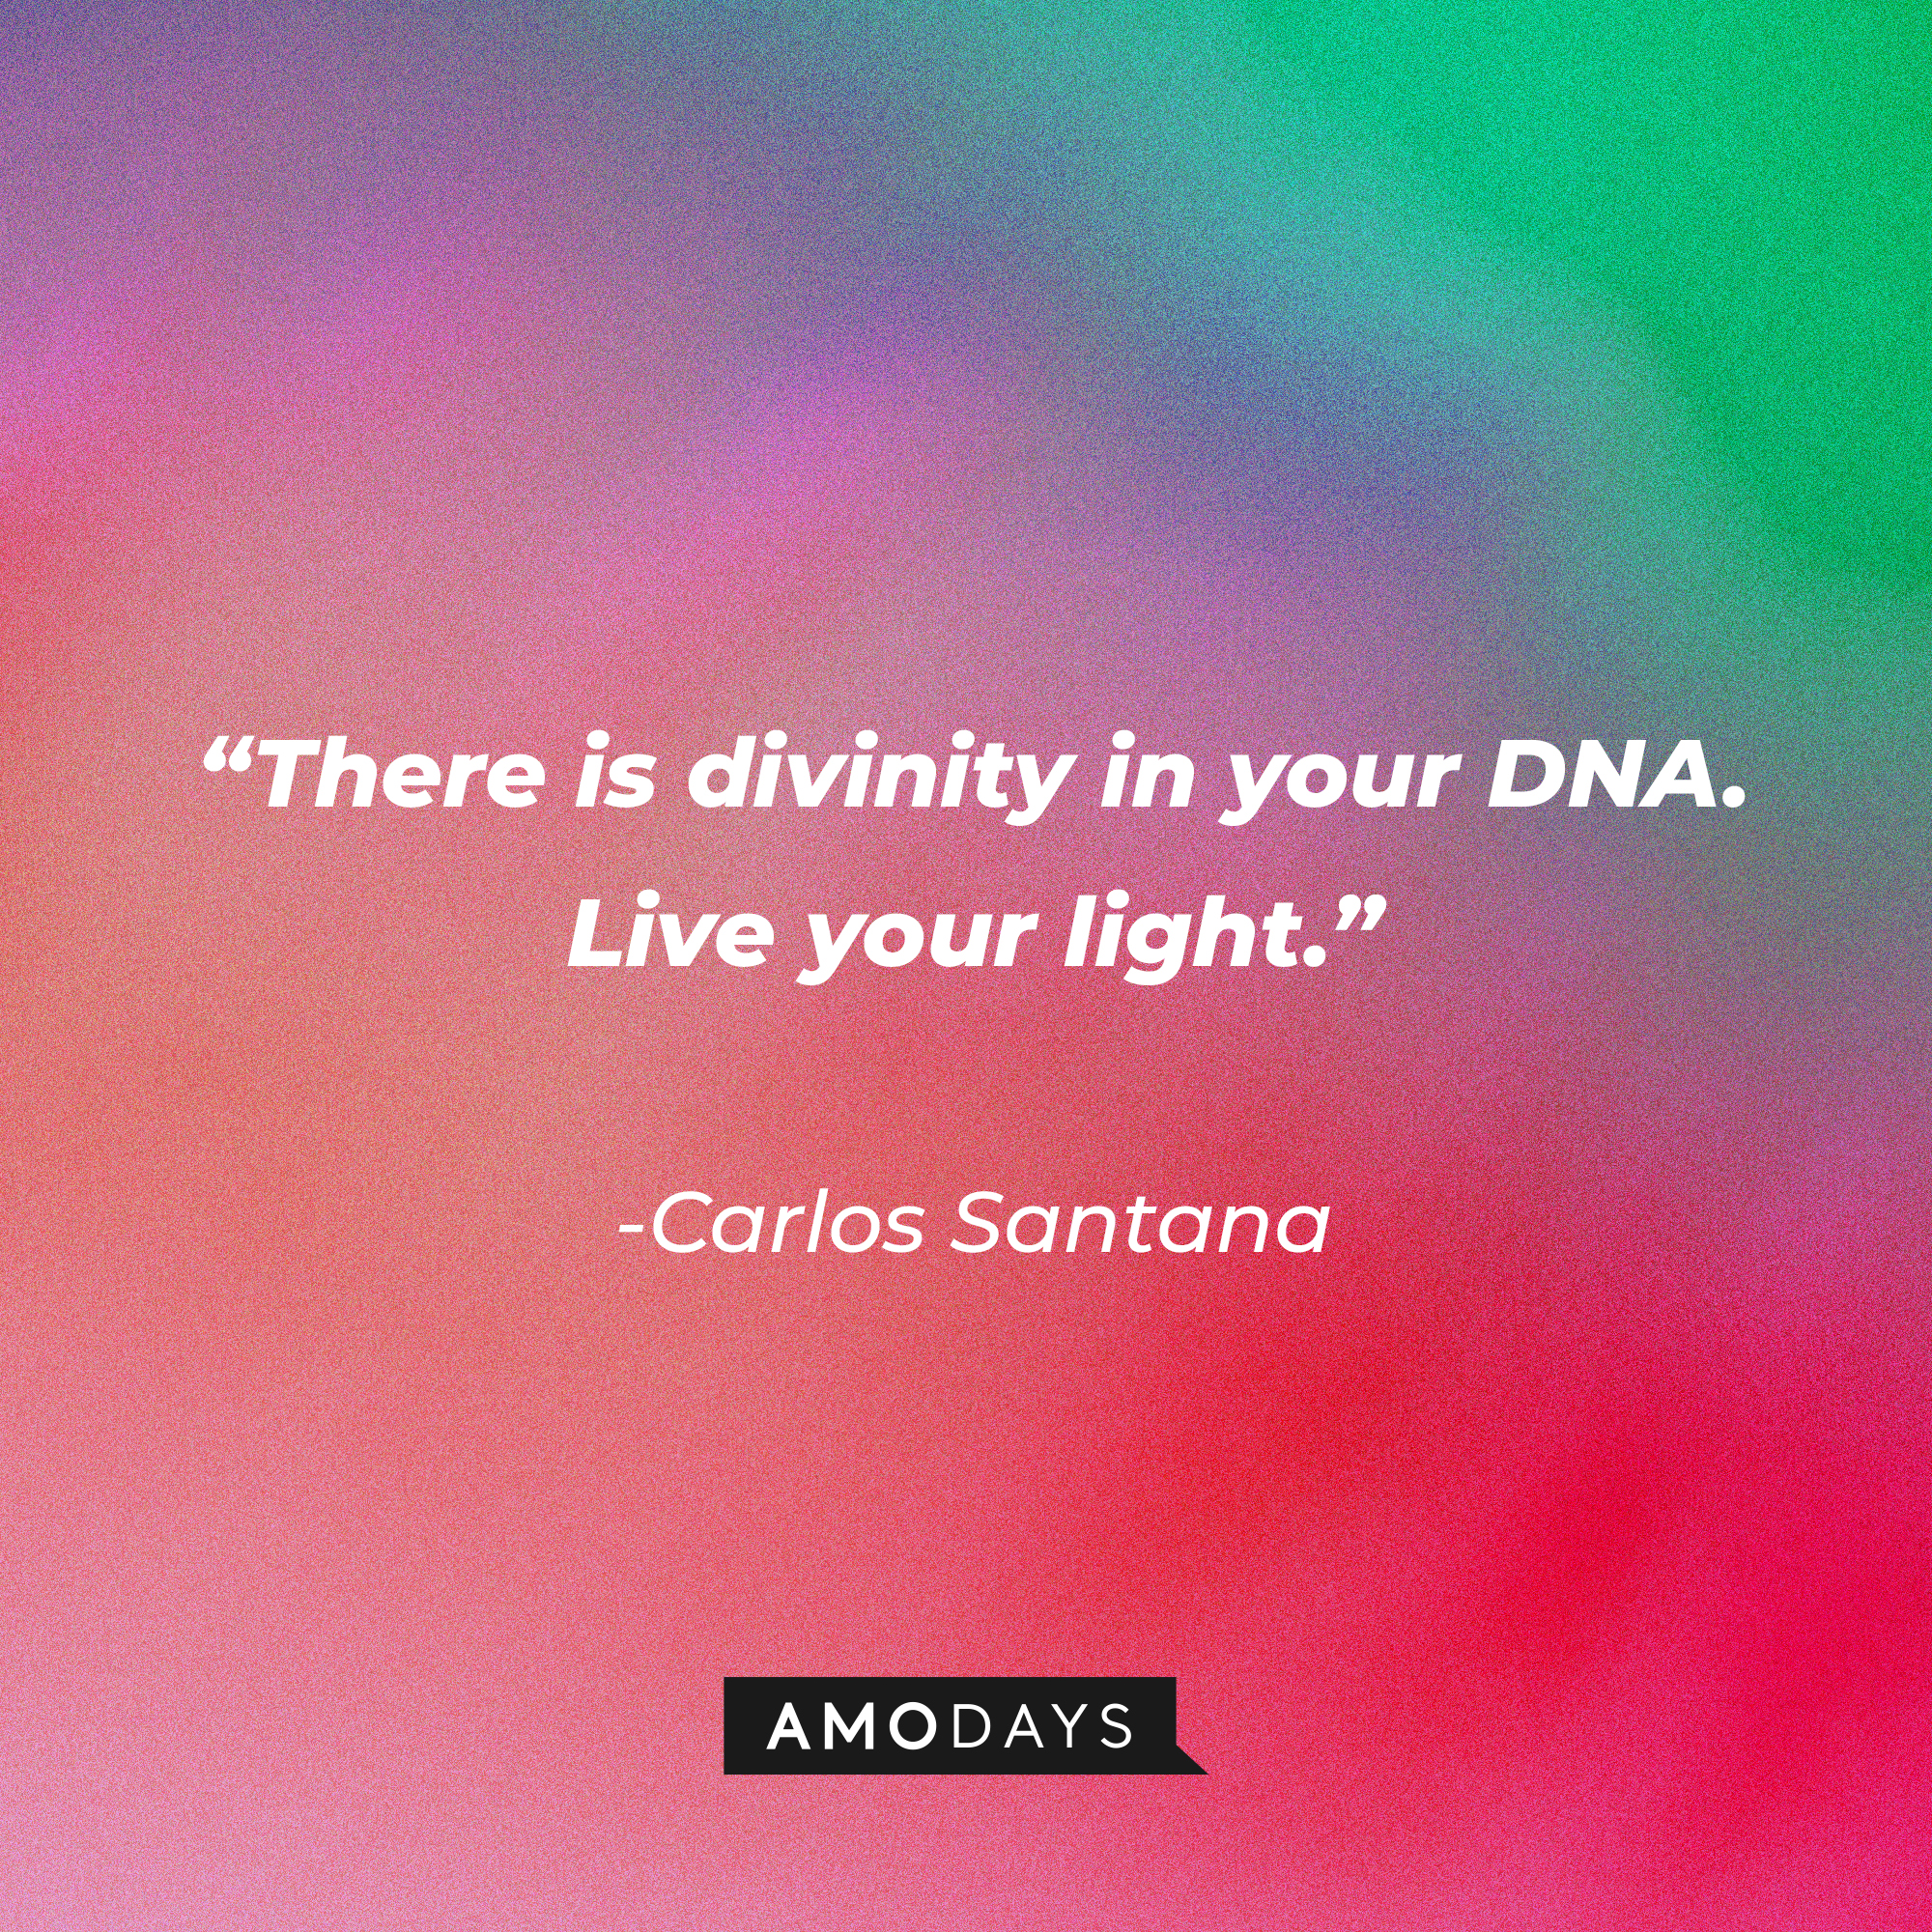 Carlos Santana’s quote: "There is divinity in your DNA. Live your light."┃Source: AmoDays